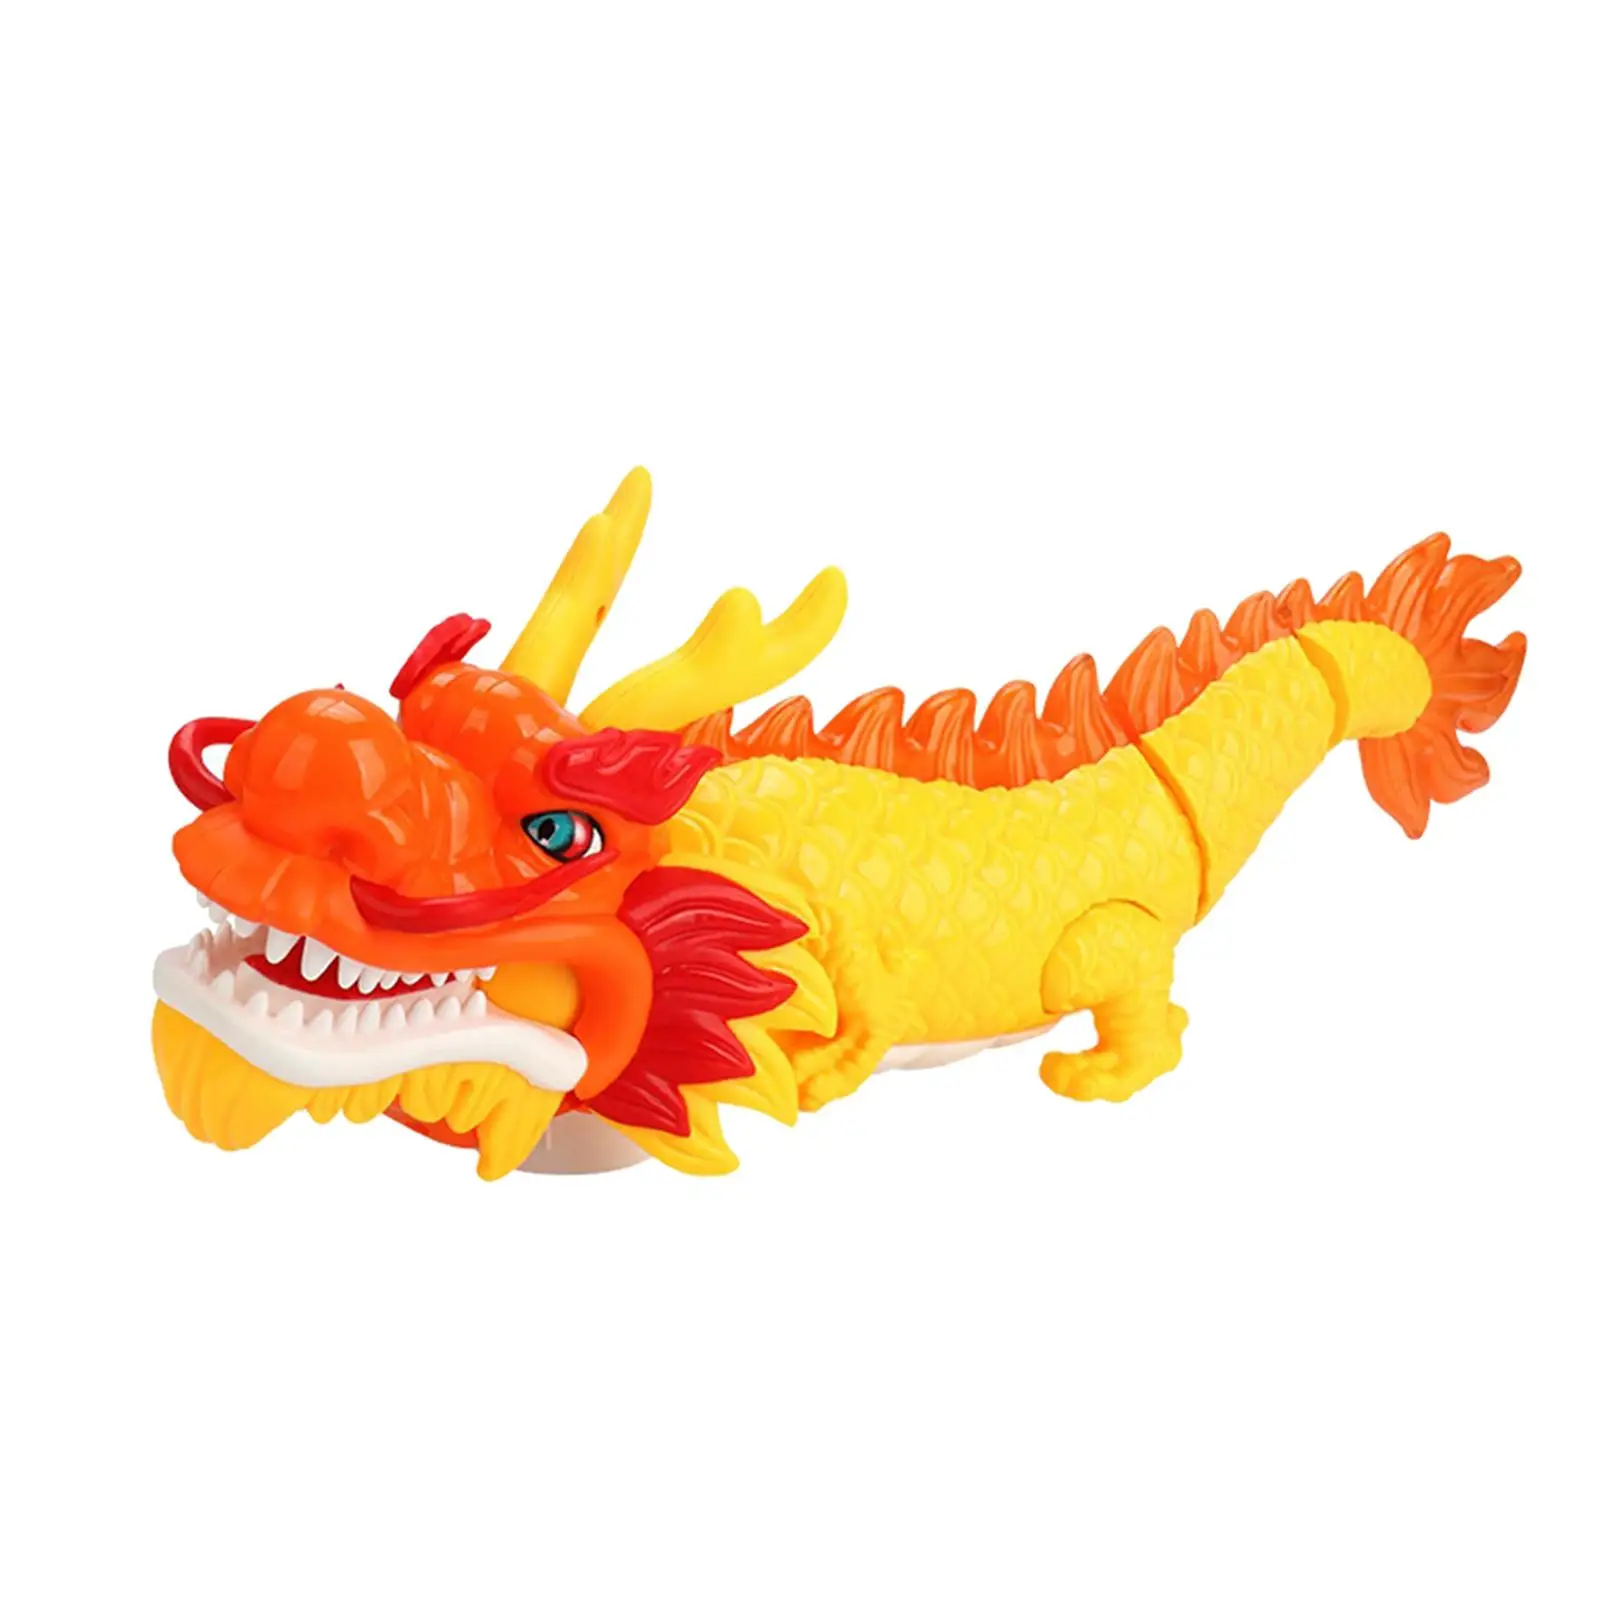 Eletric Dragon Toy Dragon Toy Gifts Birthday Gifts Realistic Crawling Toy for Children Boys 4 5 6 7 8 9 Year Olds Kid Adults